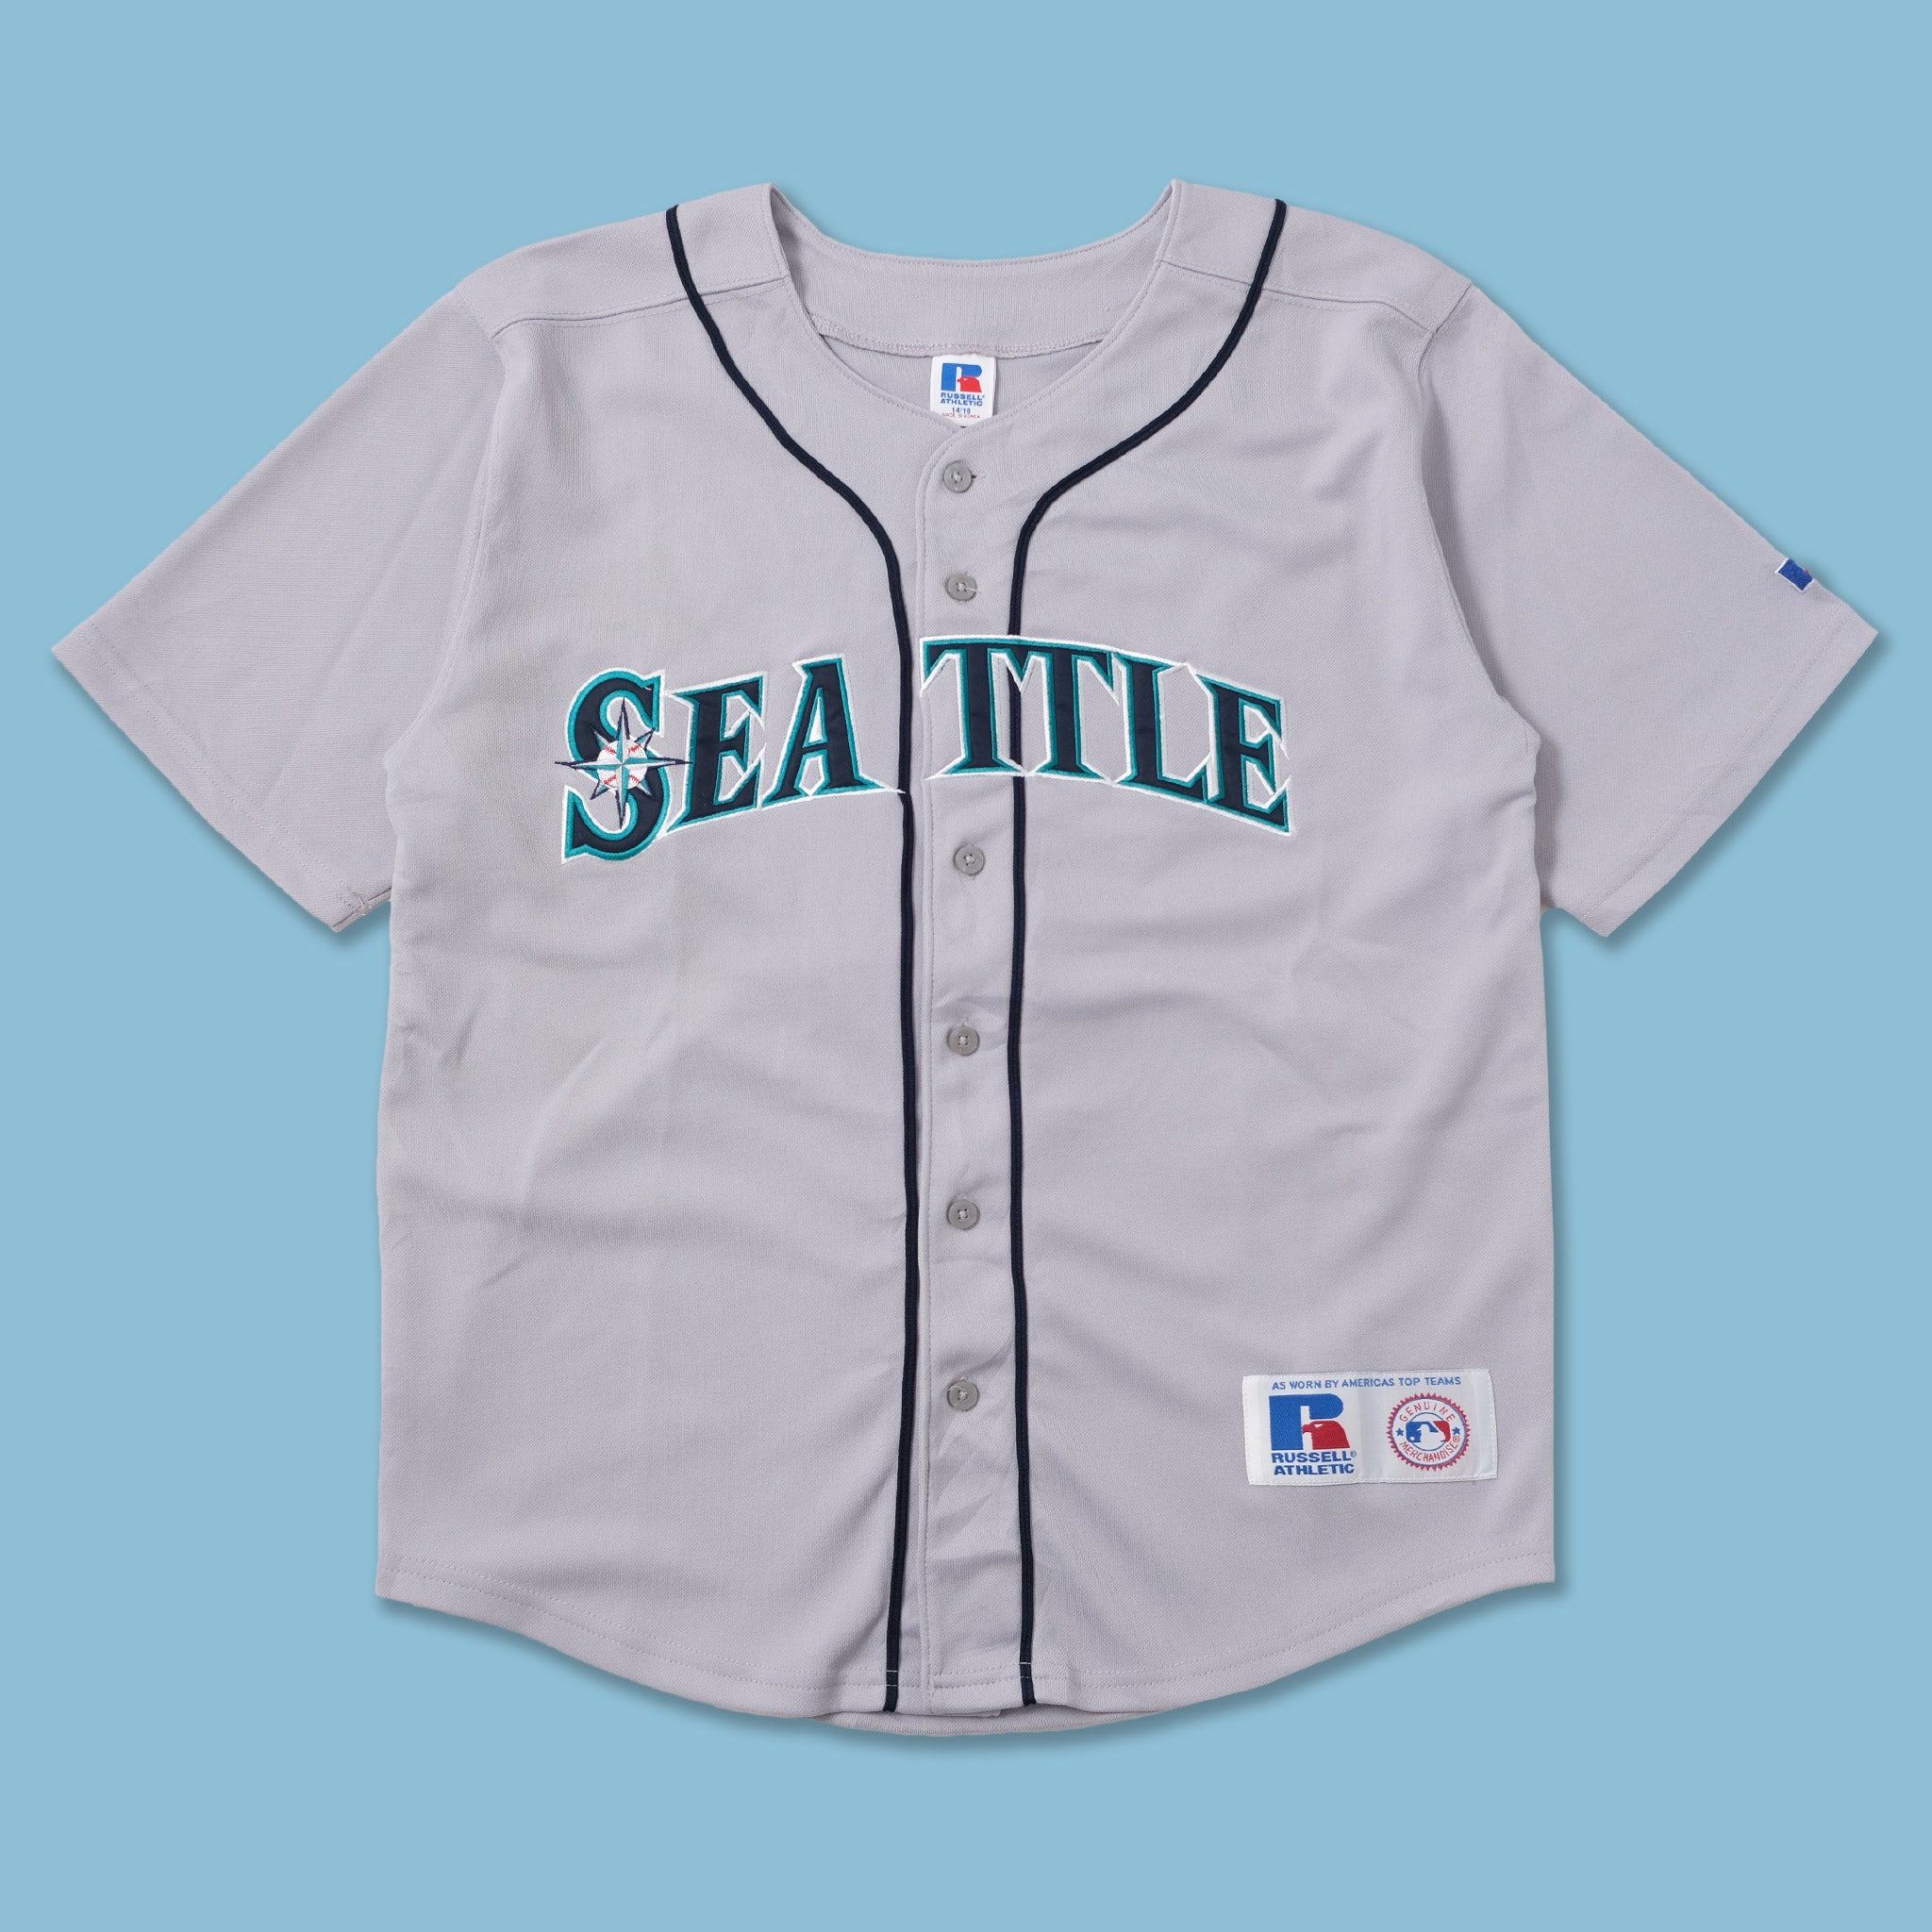 Mariners Retro Jersey for Sale in Puyallup, WA - OfferUp